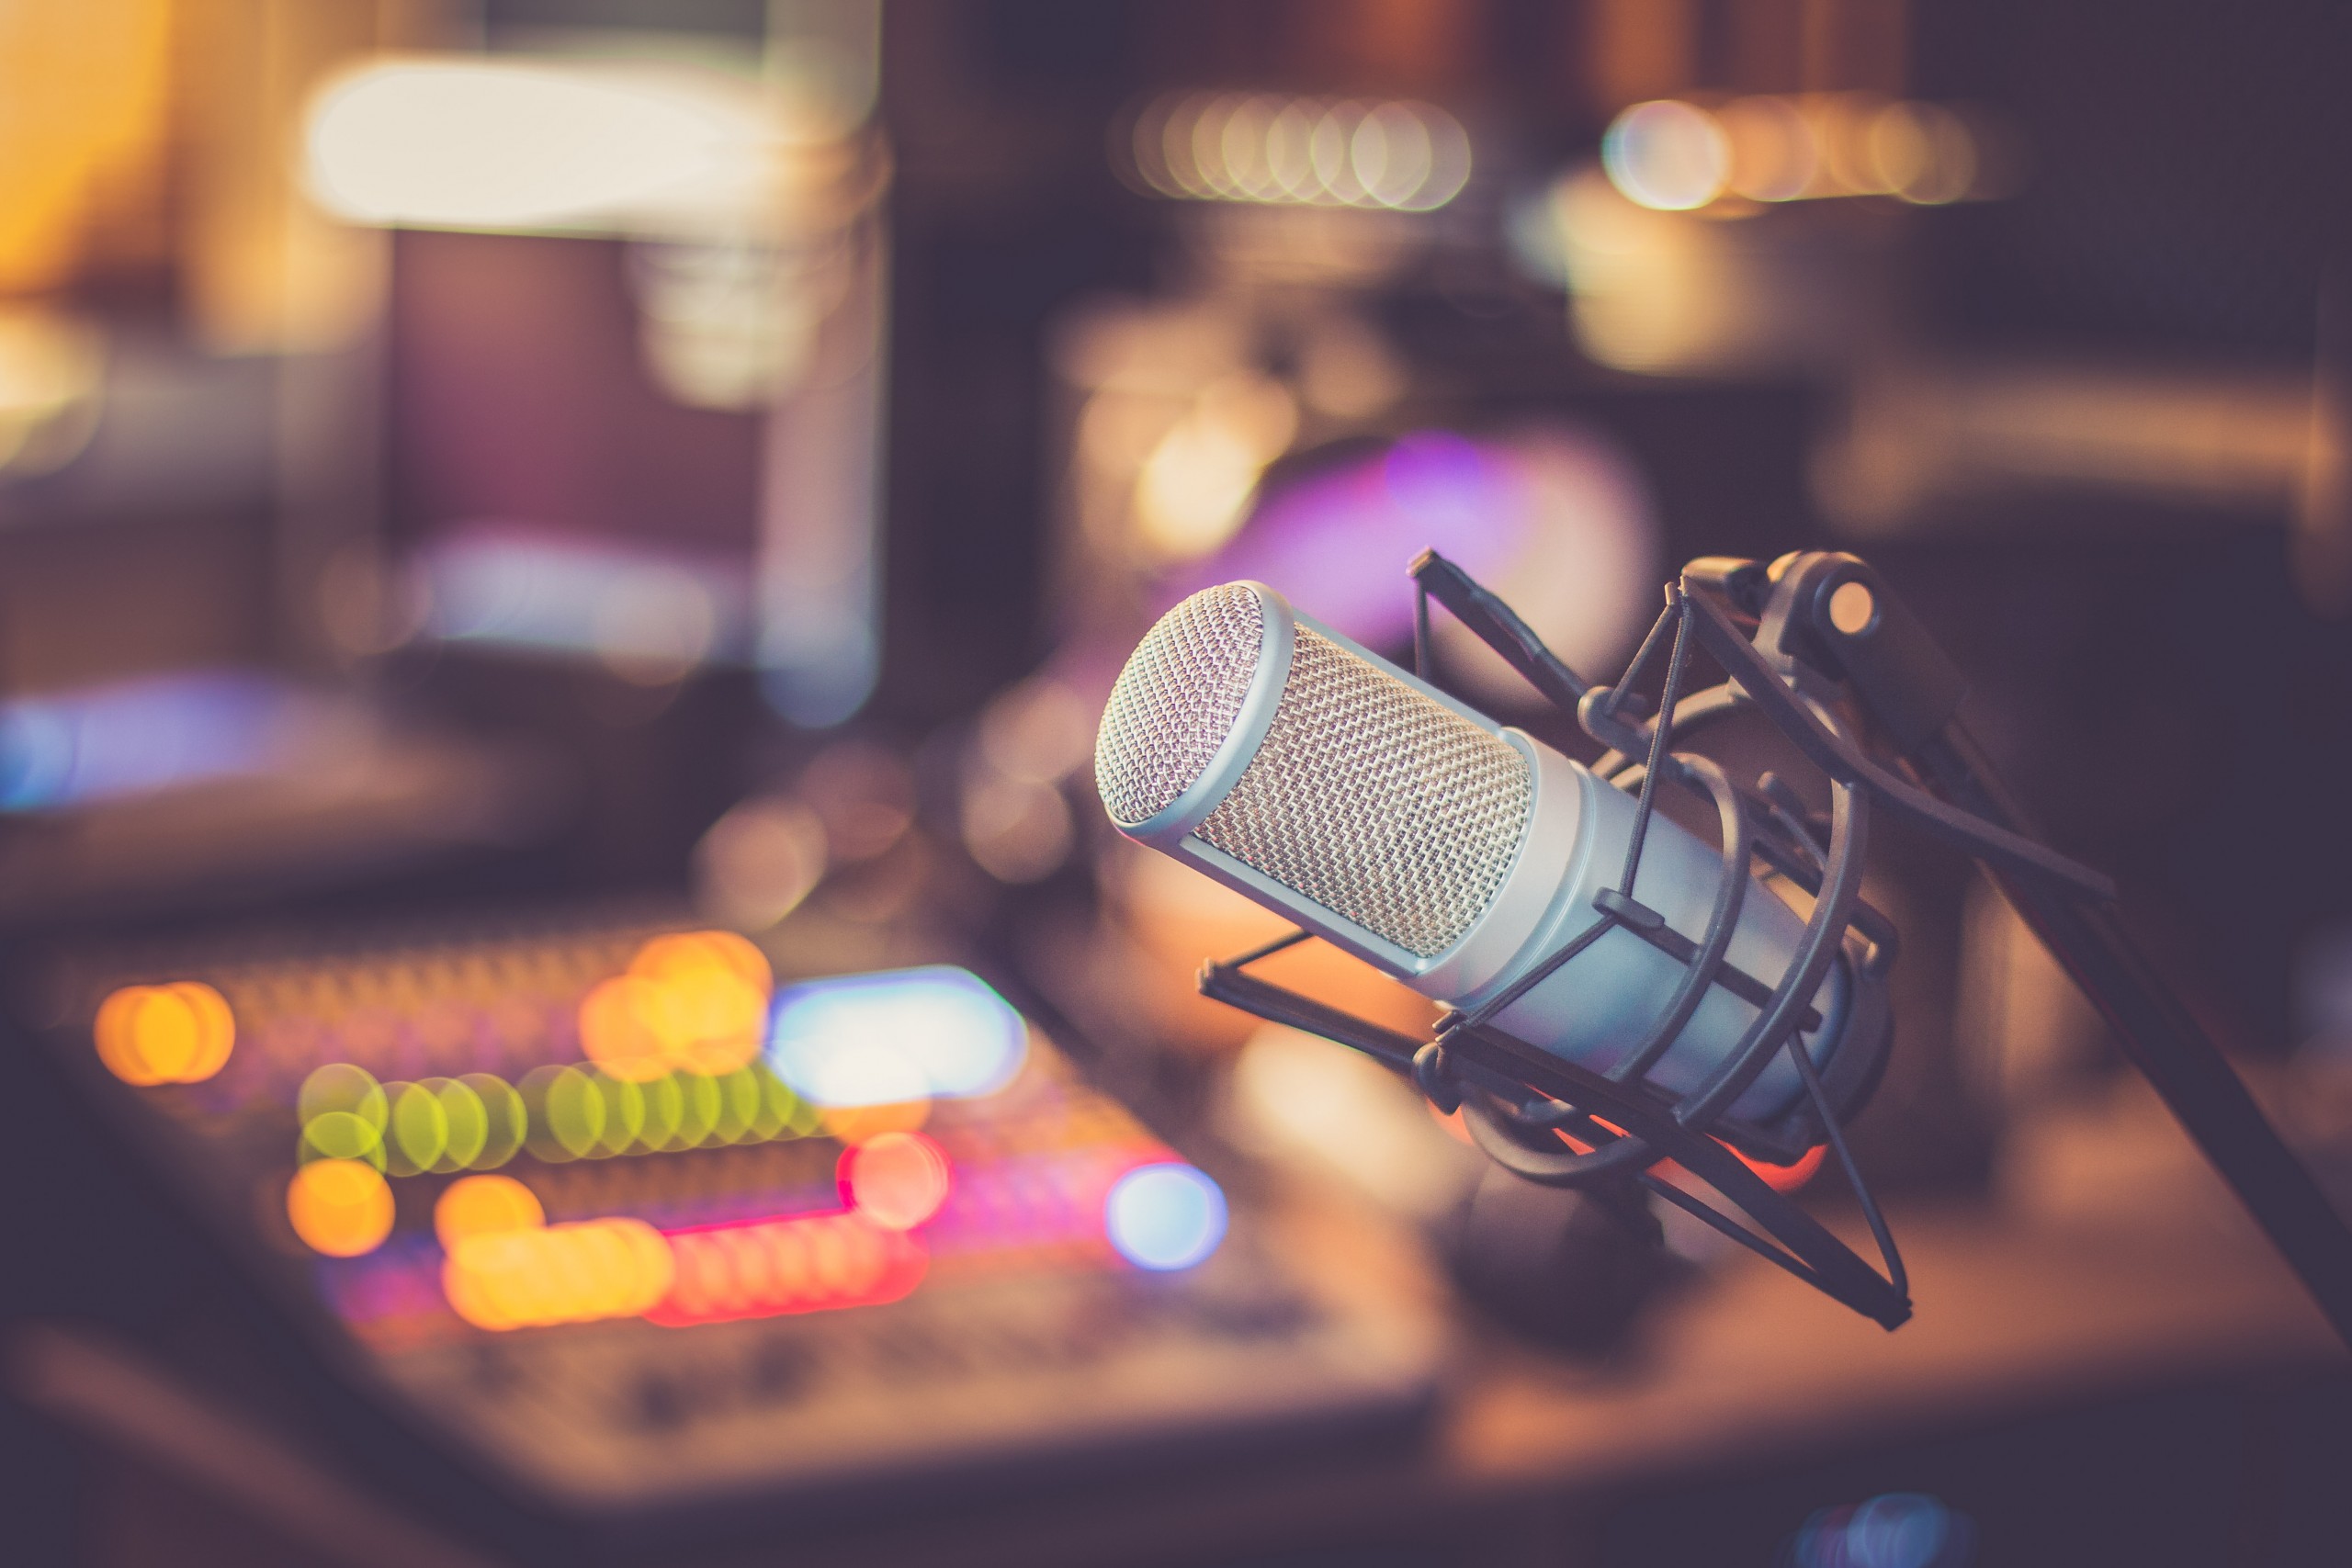 Microphone in a professional recording or radio studio, equipment in a radio stiation blurry background